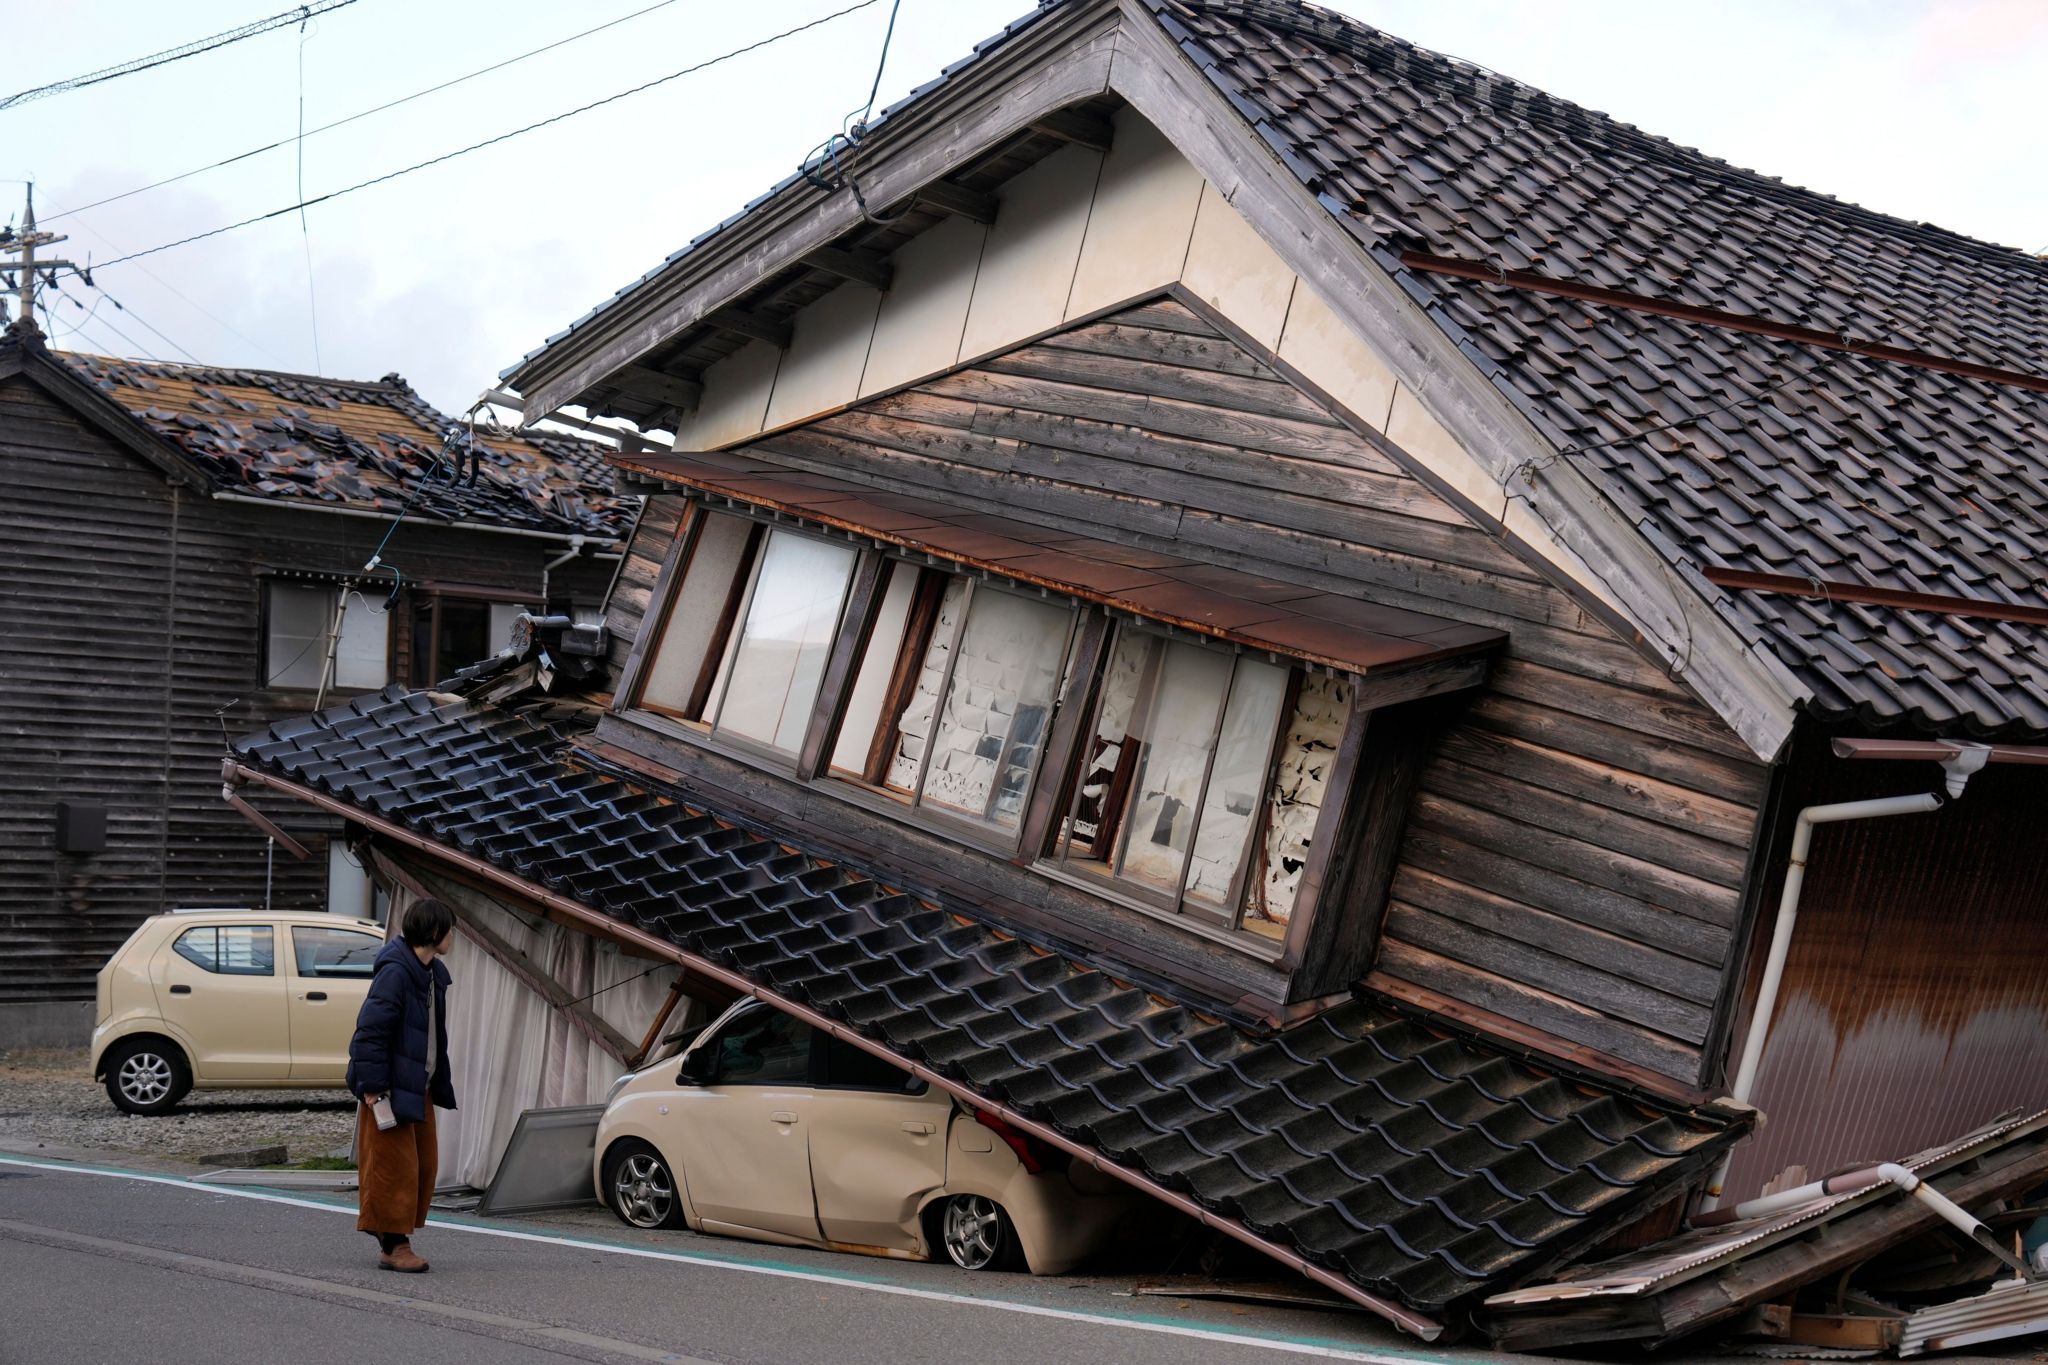 A woman walks past a collapsed house on the Noto peninsula - the epicentre of the quake